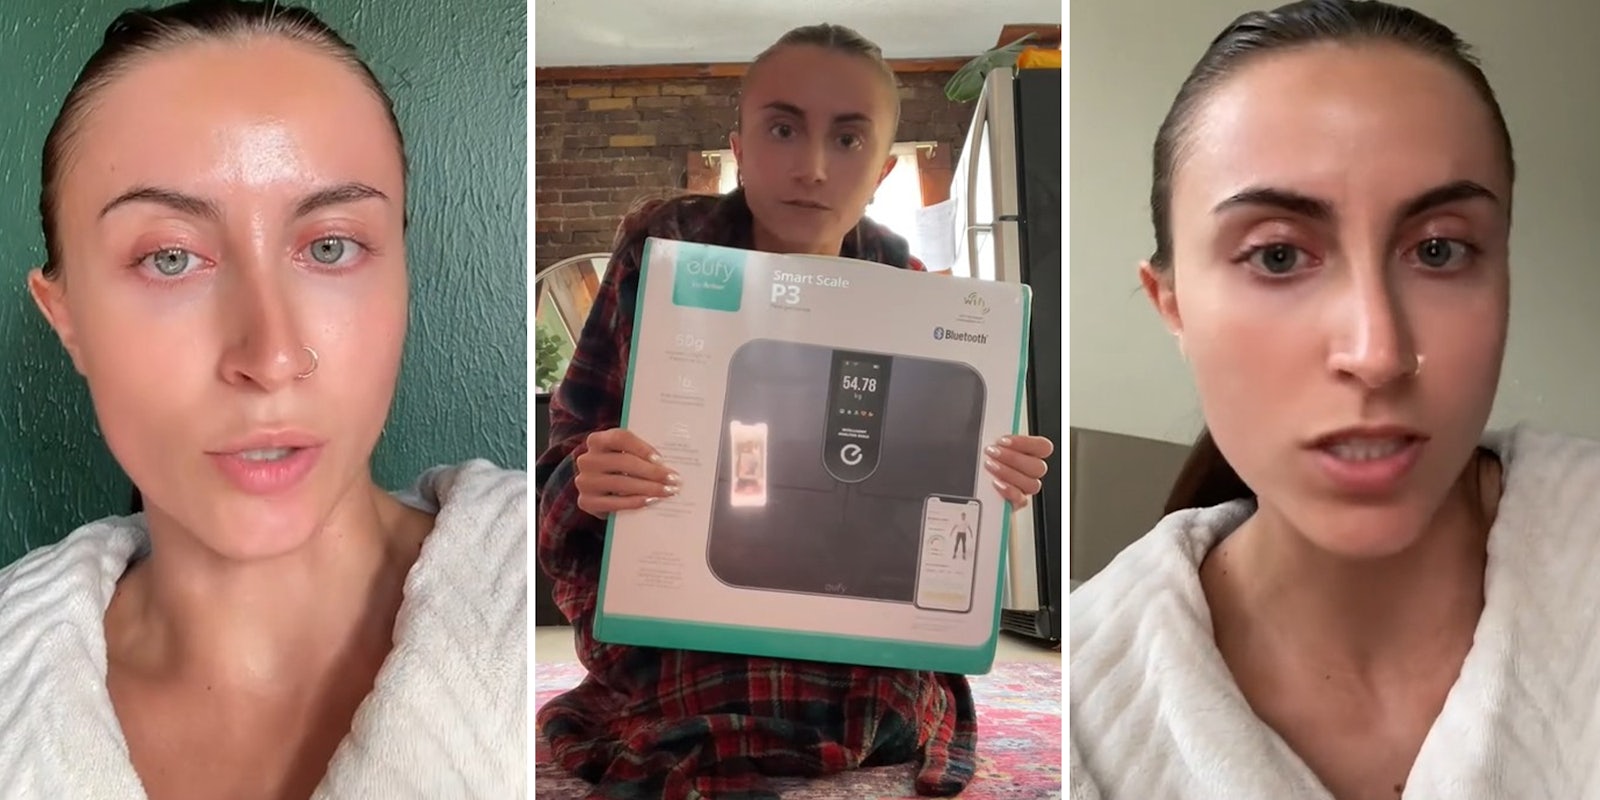 Woman says brand sent her a smart scale. She never gave them her address